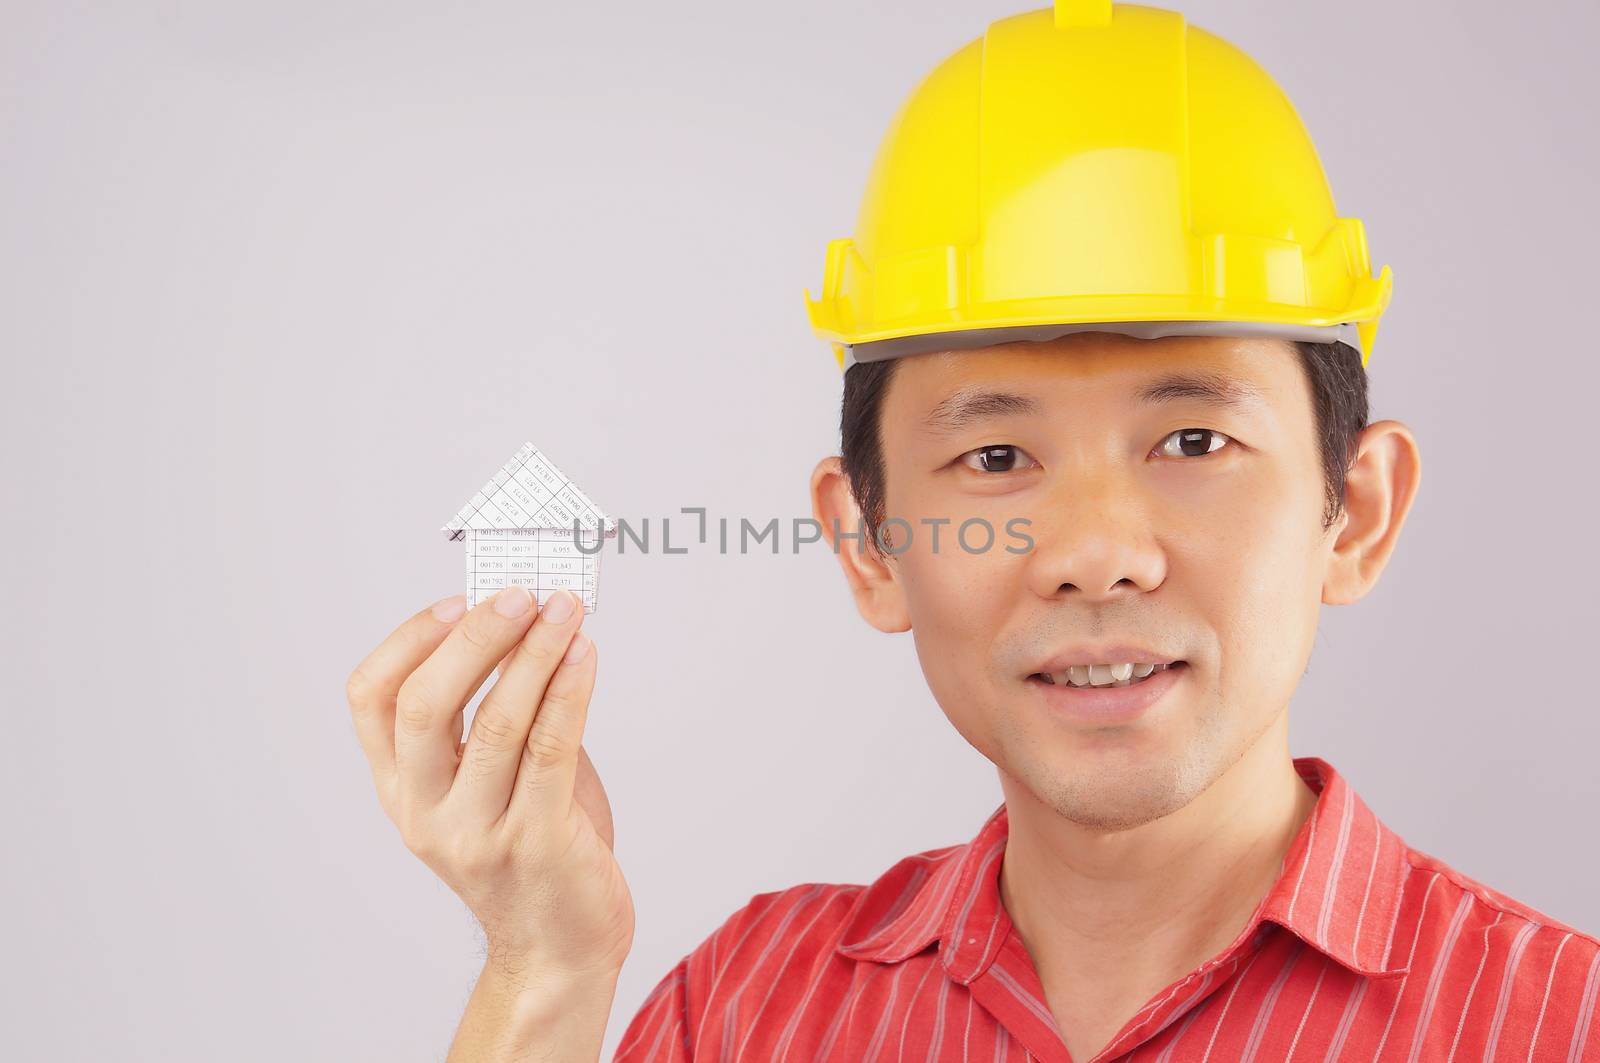 Engineer wear red shirt and yellow engineer hat holding house on white background.